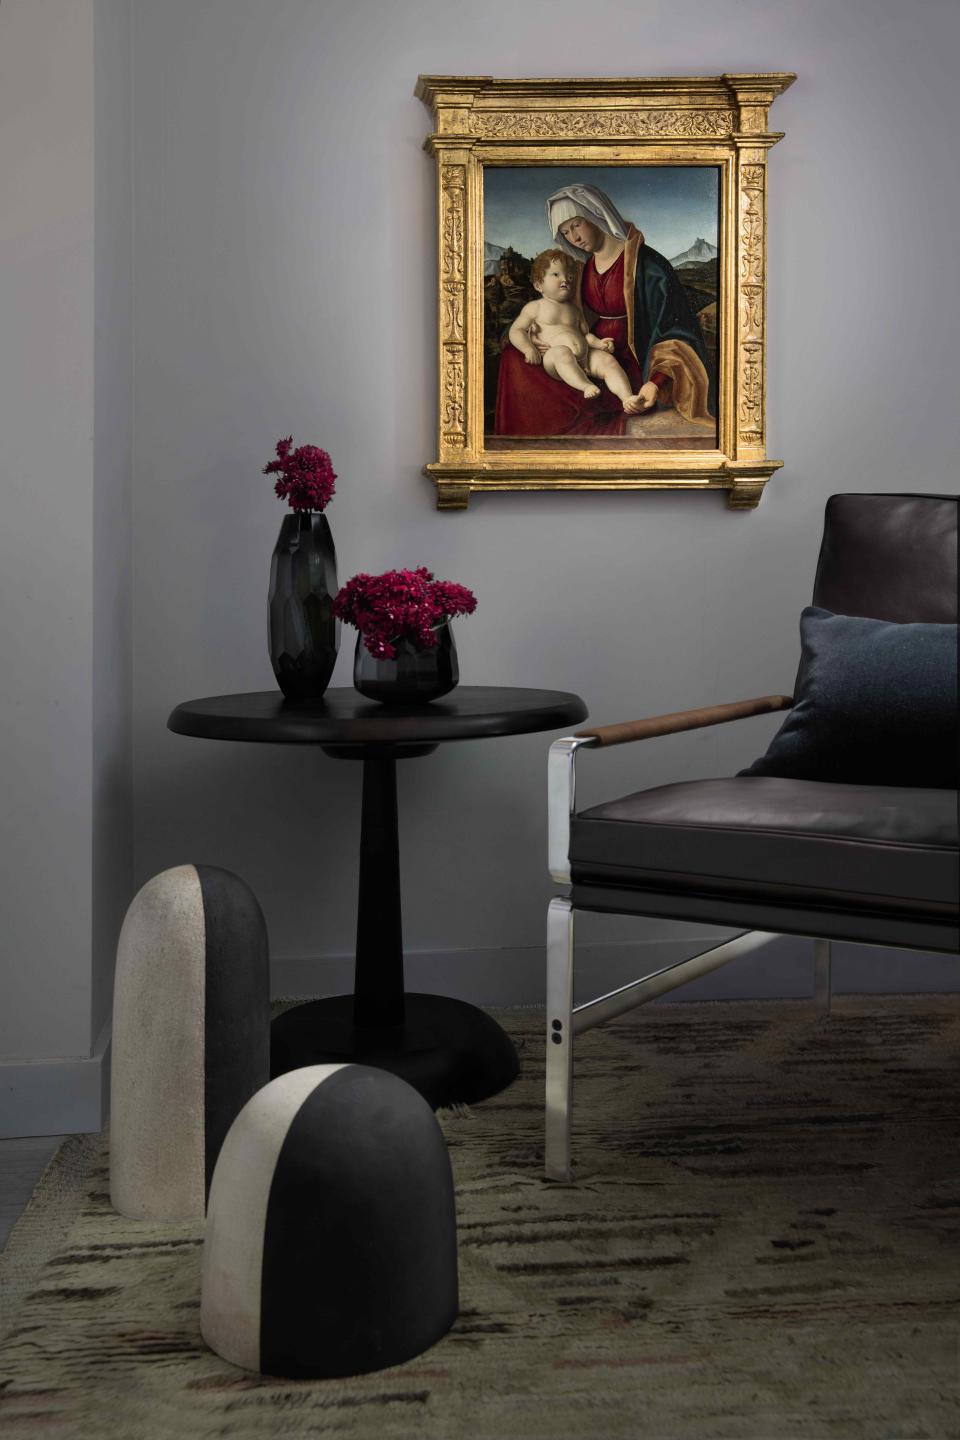 Andrew Finnigan's Offset Pedestal table, Michele Quan sculptures, and an FK 6720-1 easy chair by Fabricius & Kastholm under Giovanni Battista Cima's Madonna and her Child Before a Landscape.